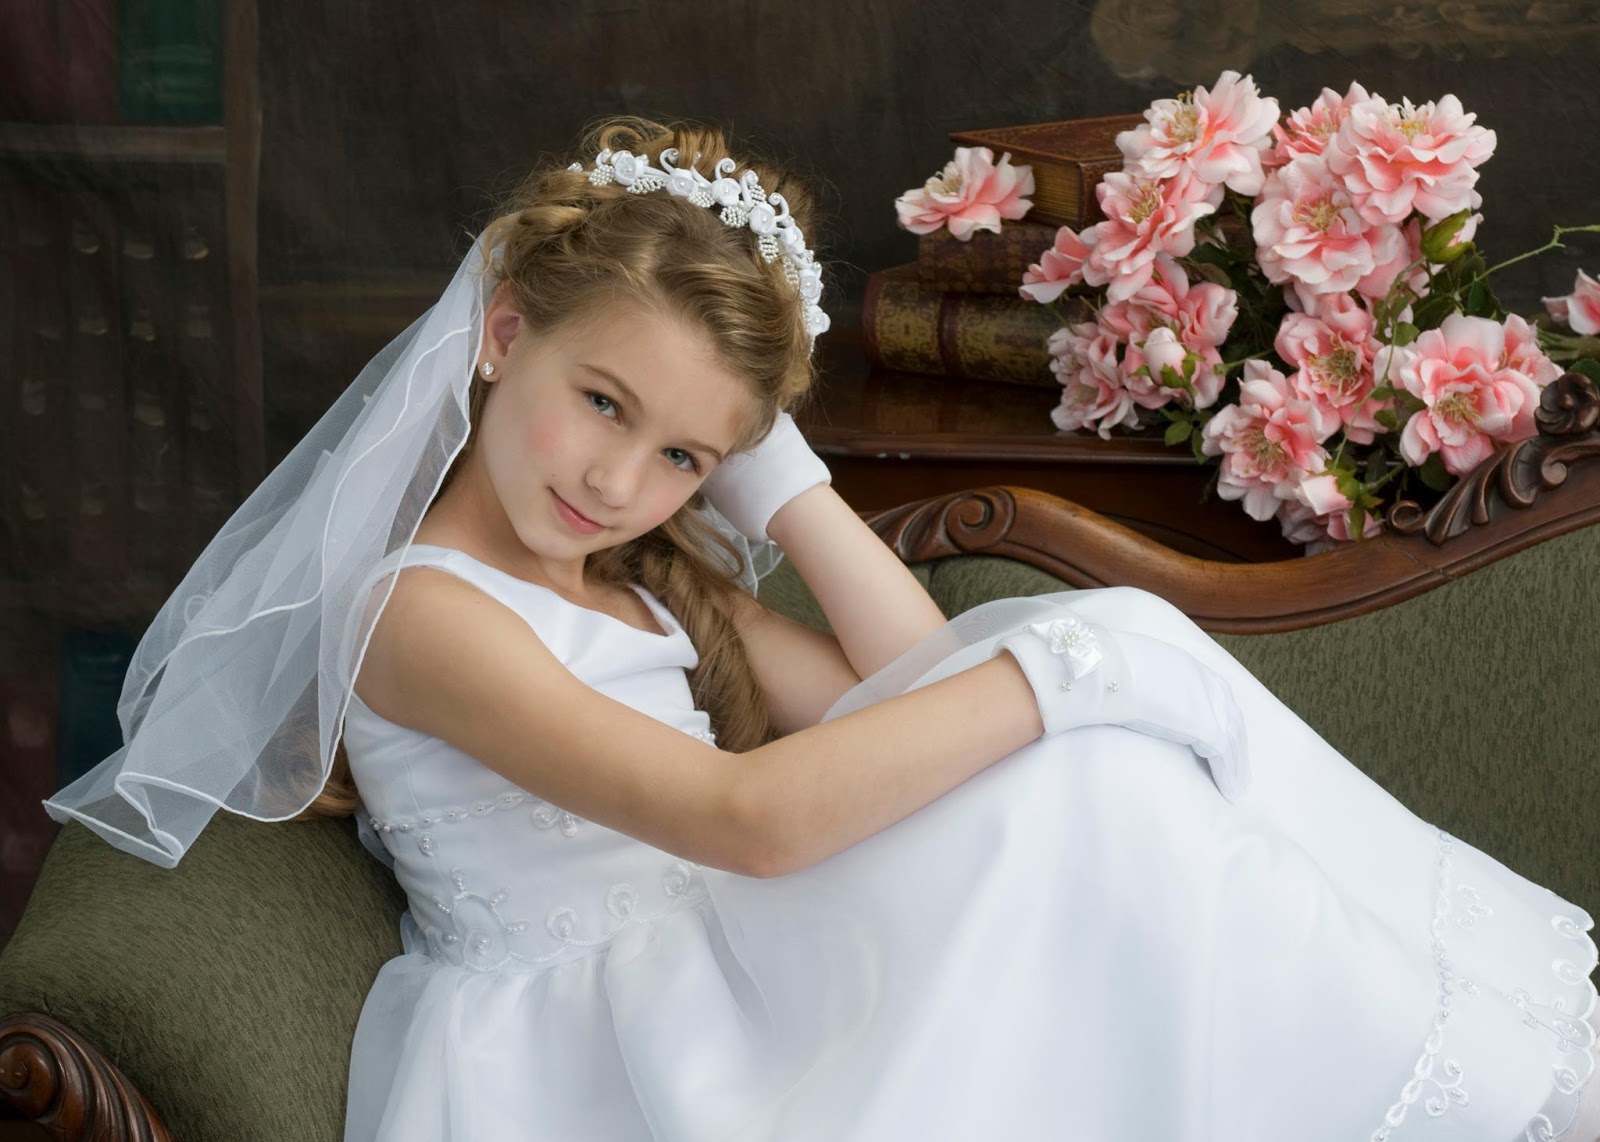 First Communion Dresses End of Year Clearance Sale